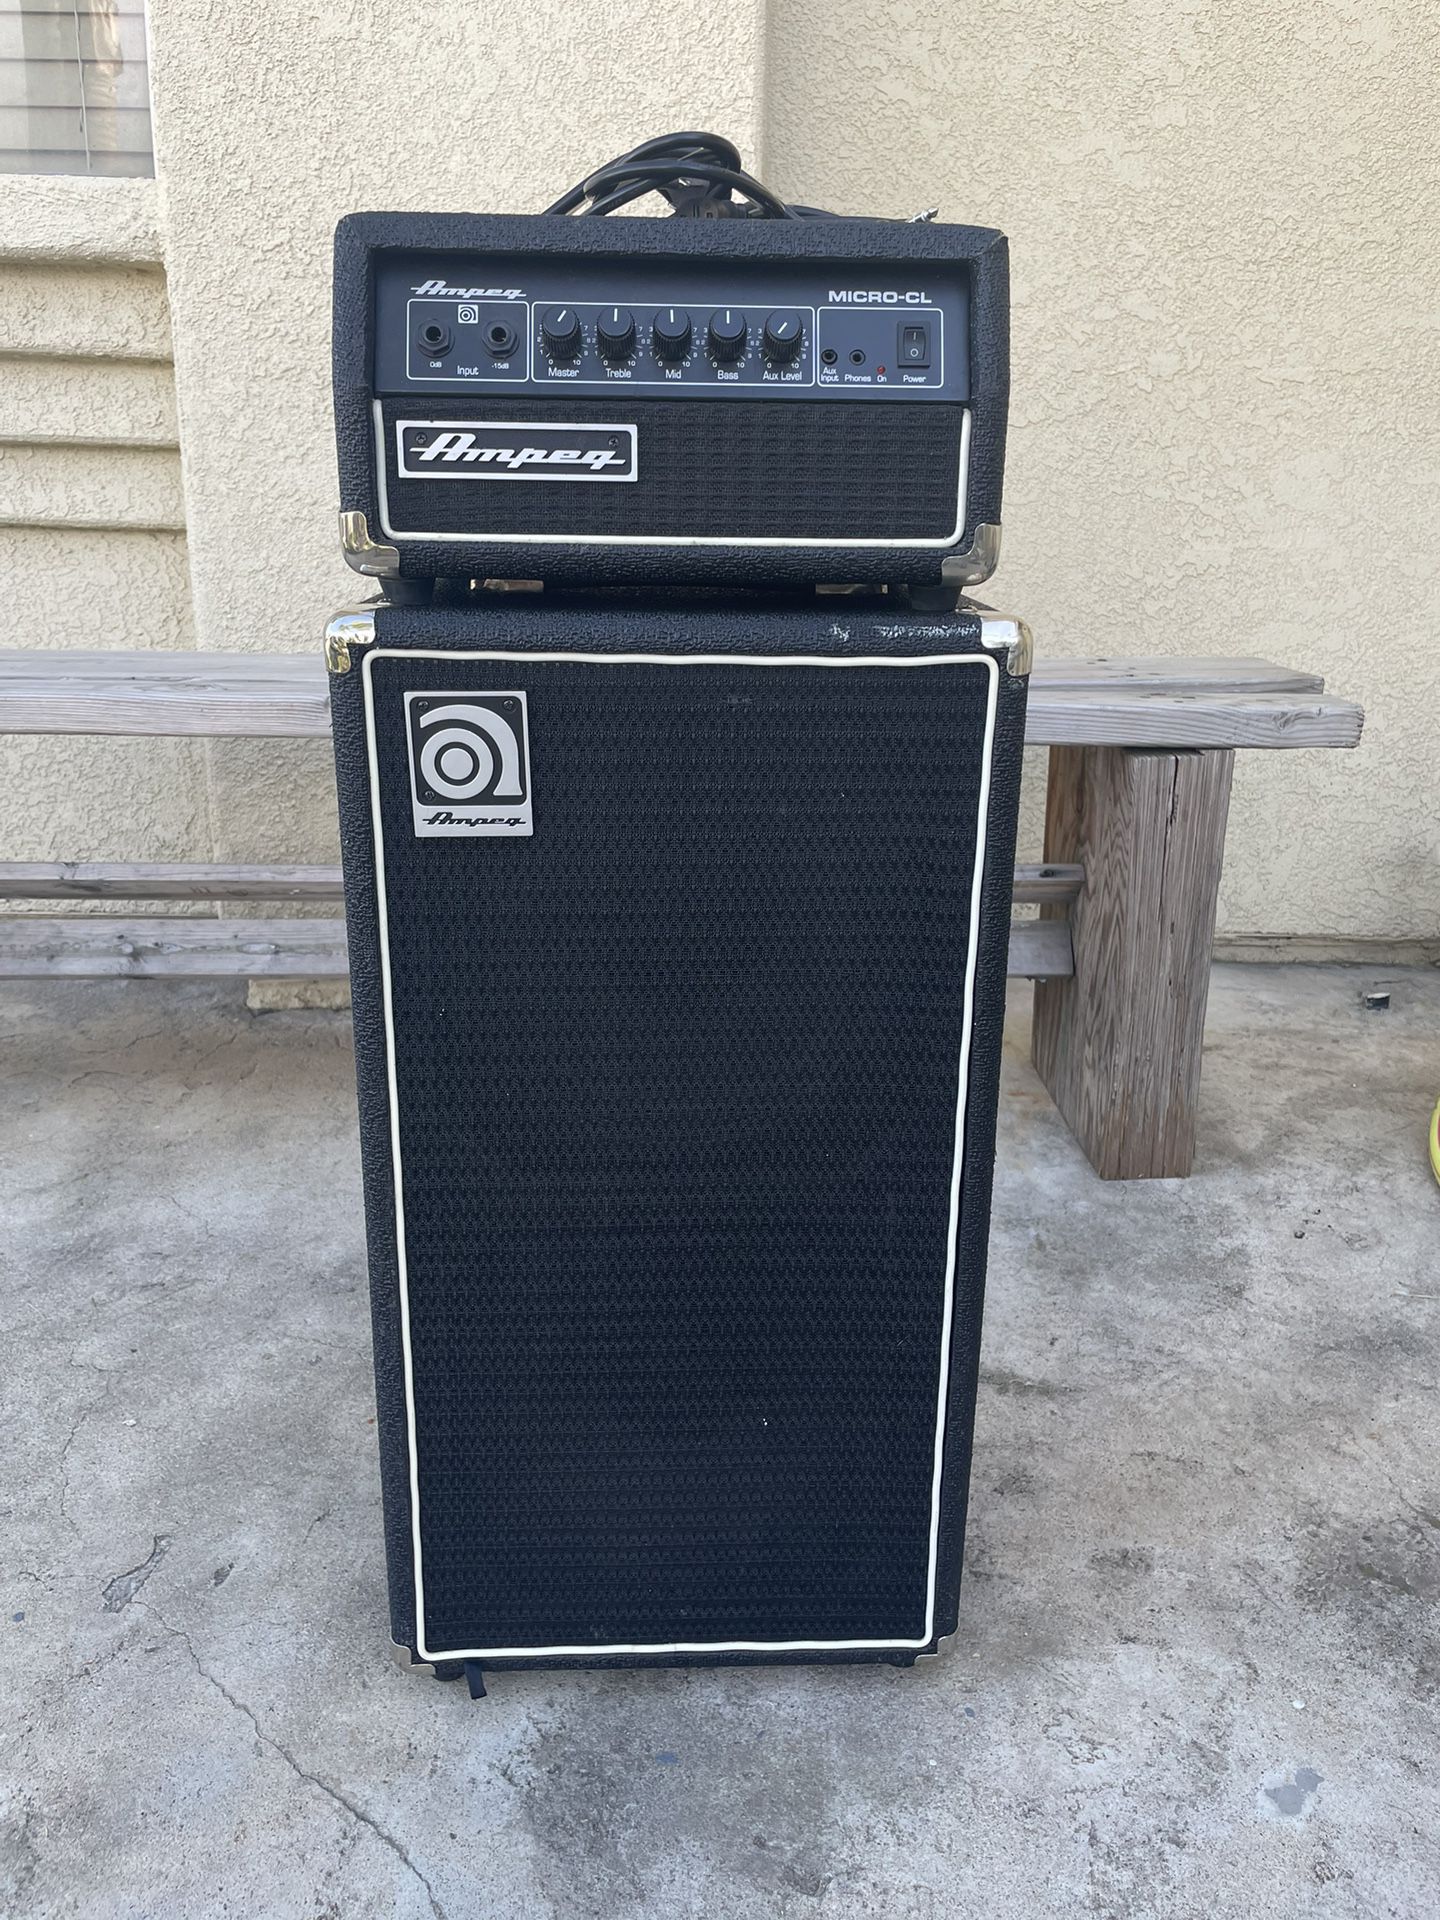 Ampeg MICRO CL bass Amp For Sale